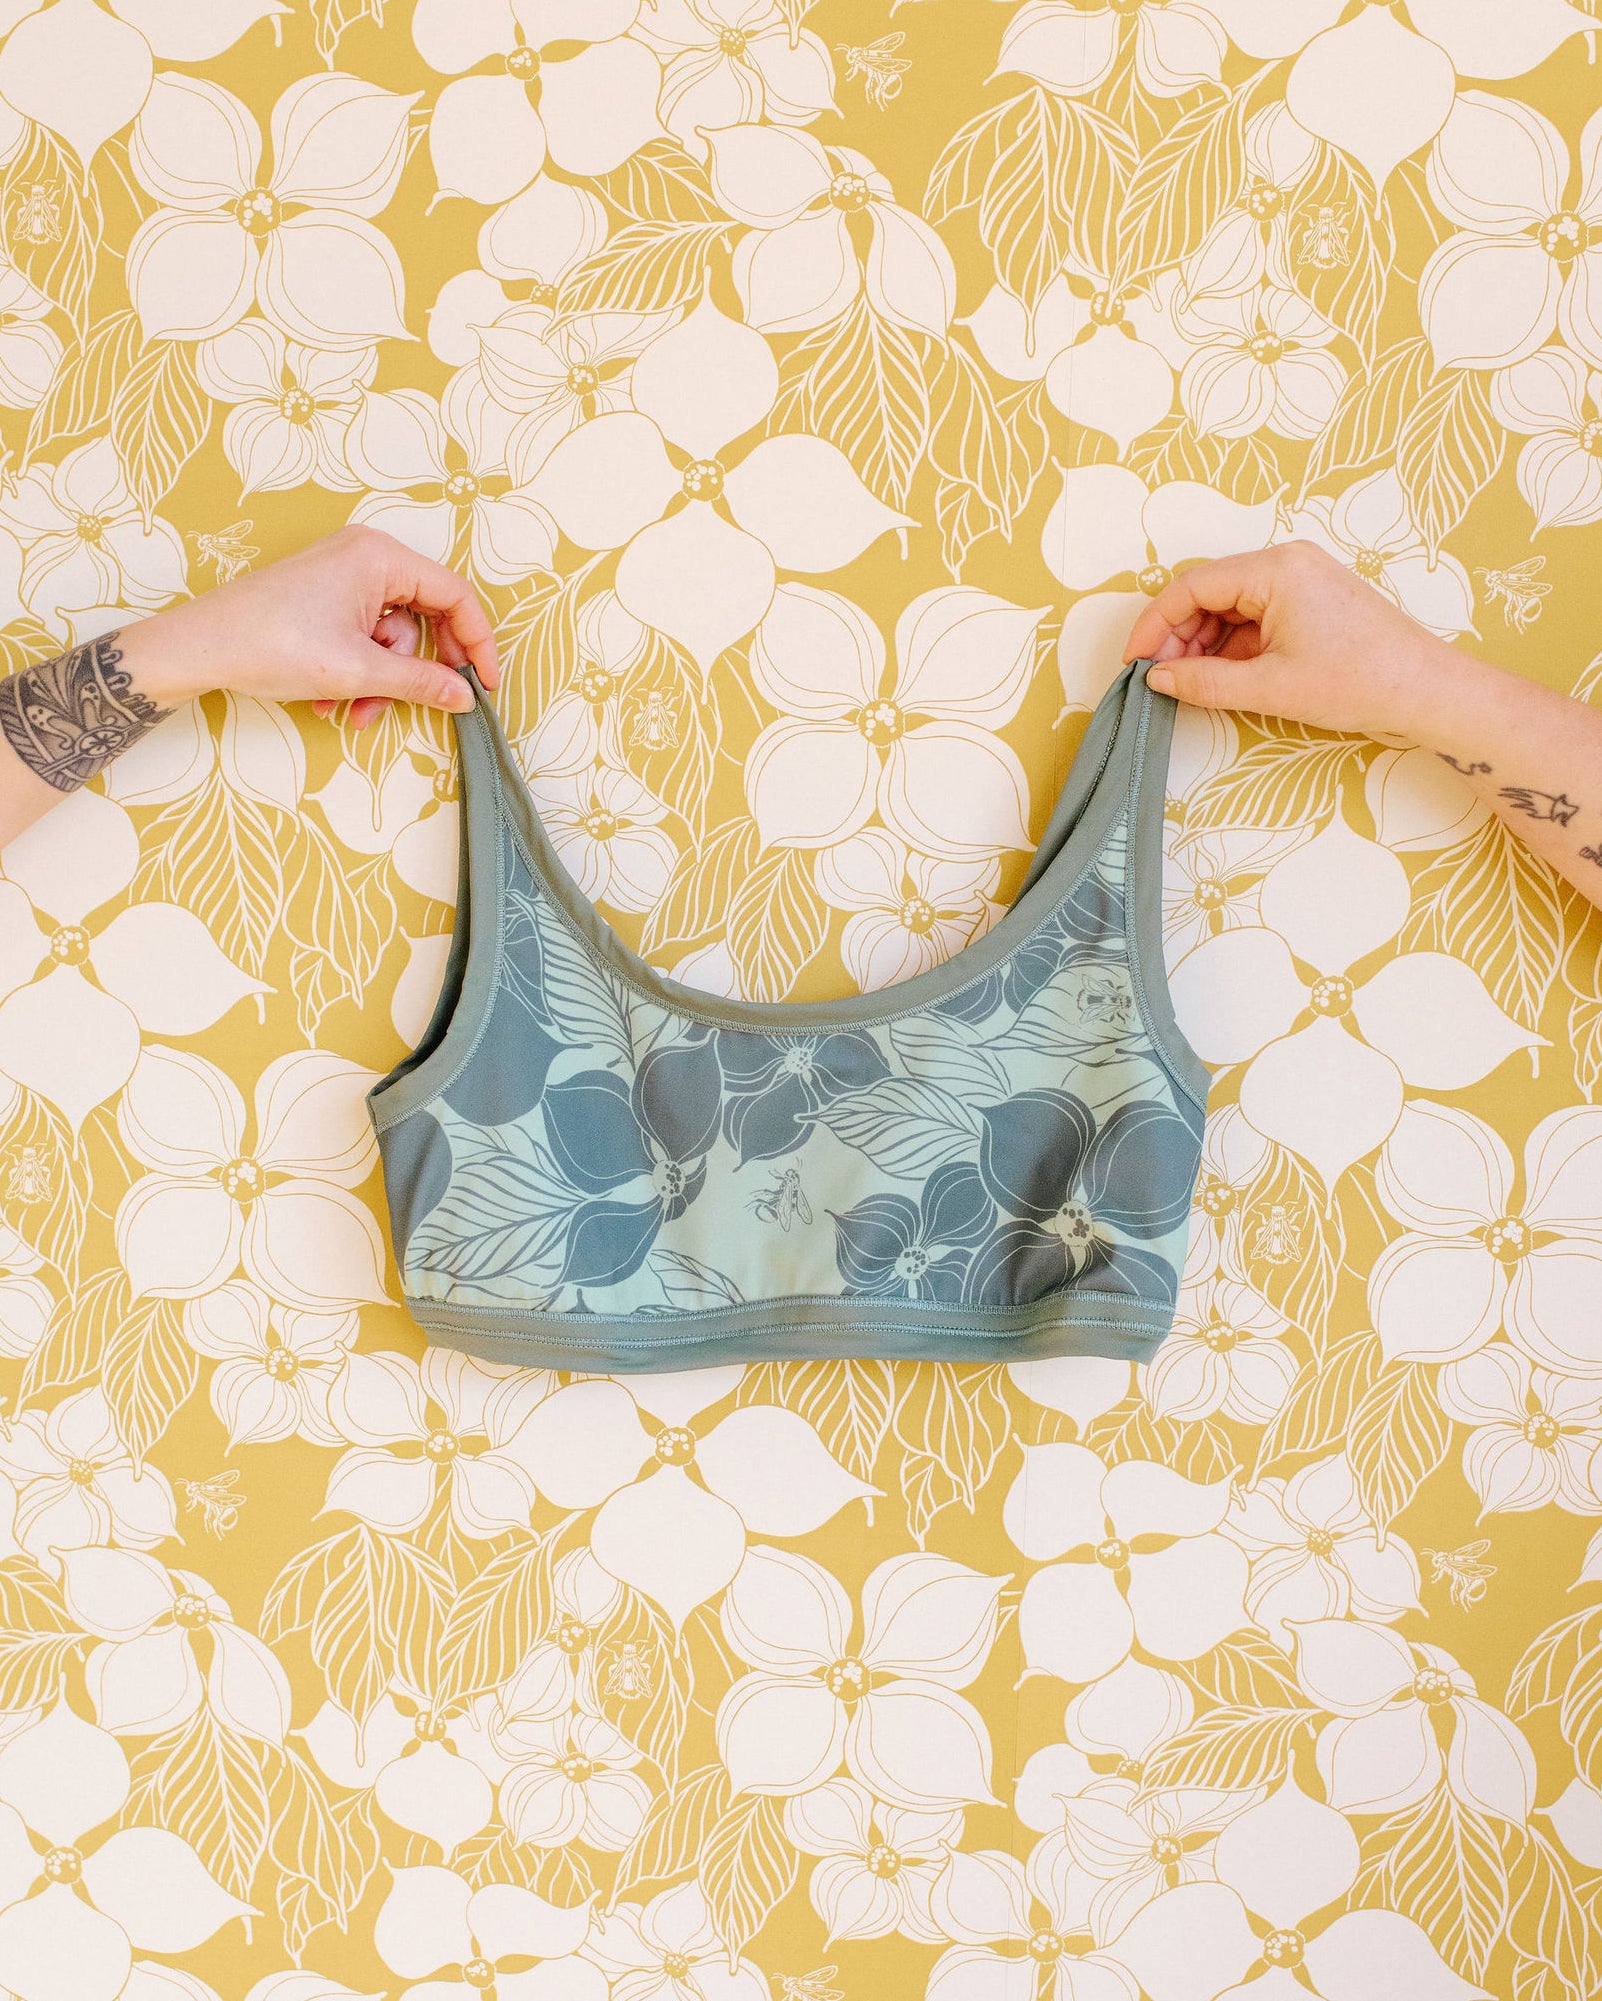 Hands holding Thunderpants Swimwear Top in Dogwood by Lonesome Pictopia.